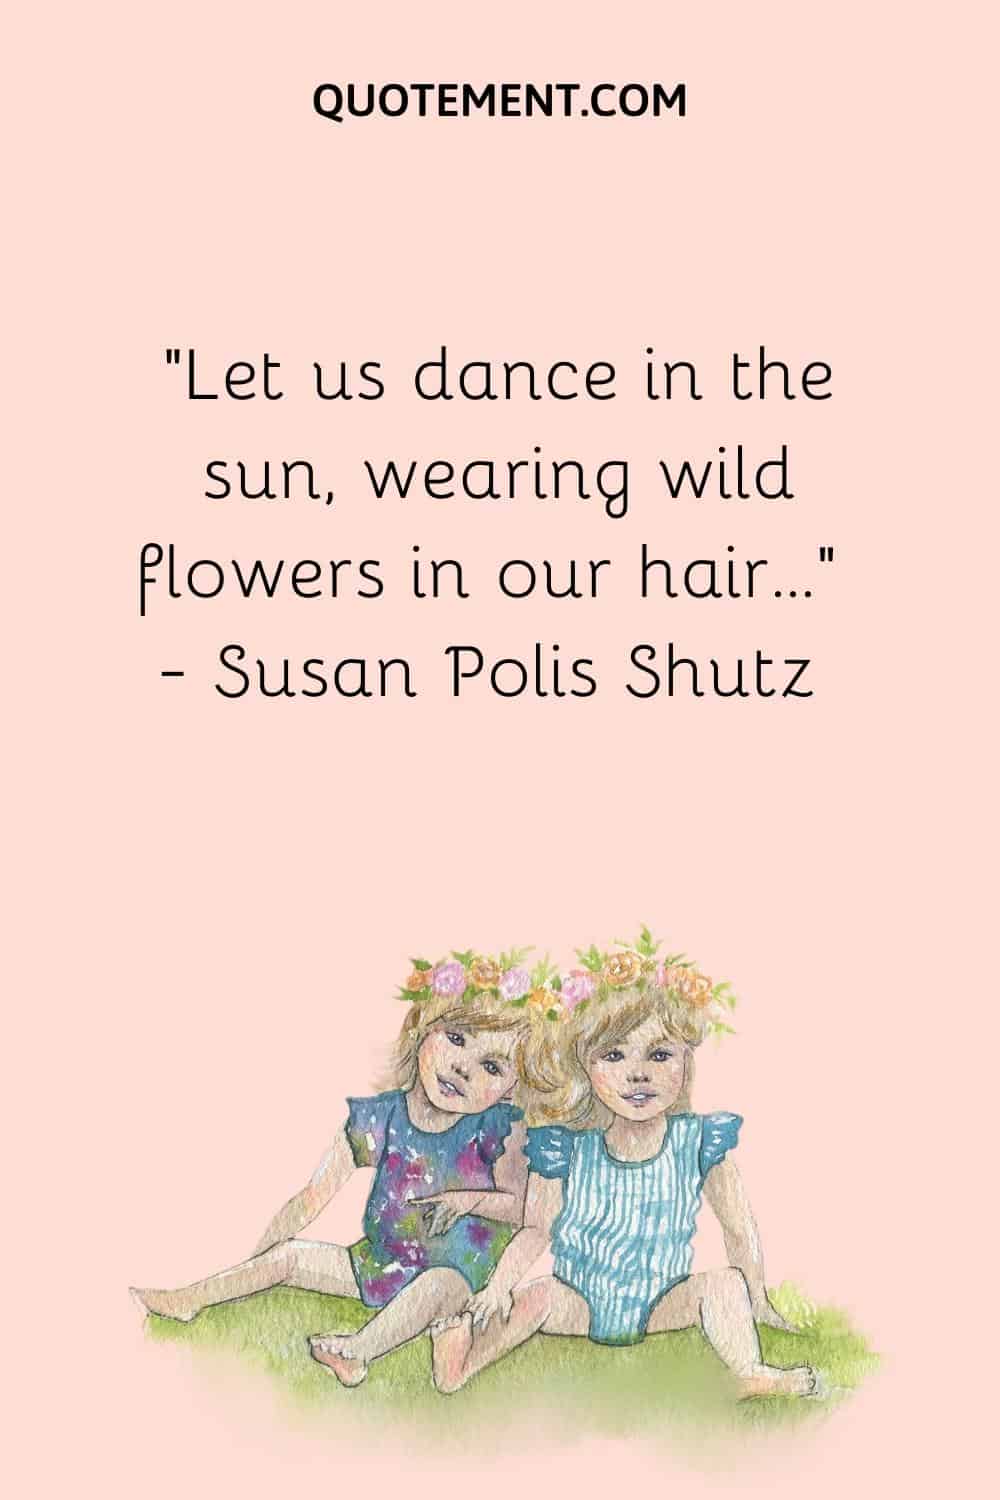 “Let us dance in the sun, wearing wild flowers in our hair…” — Susan Polis Shutz